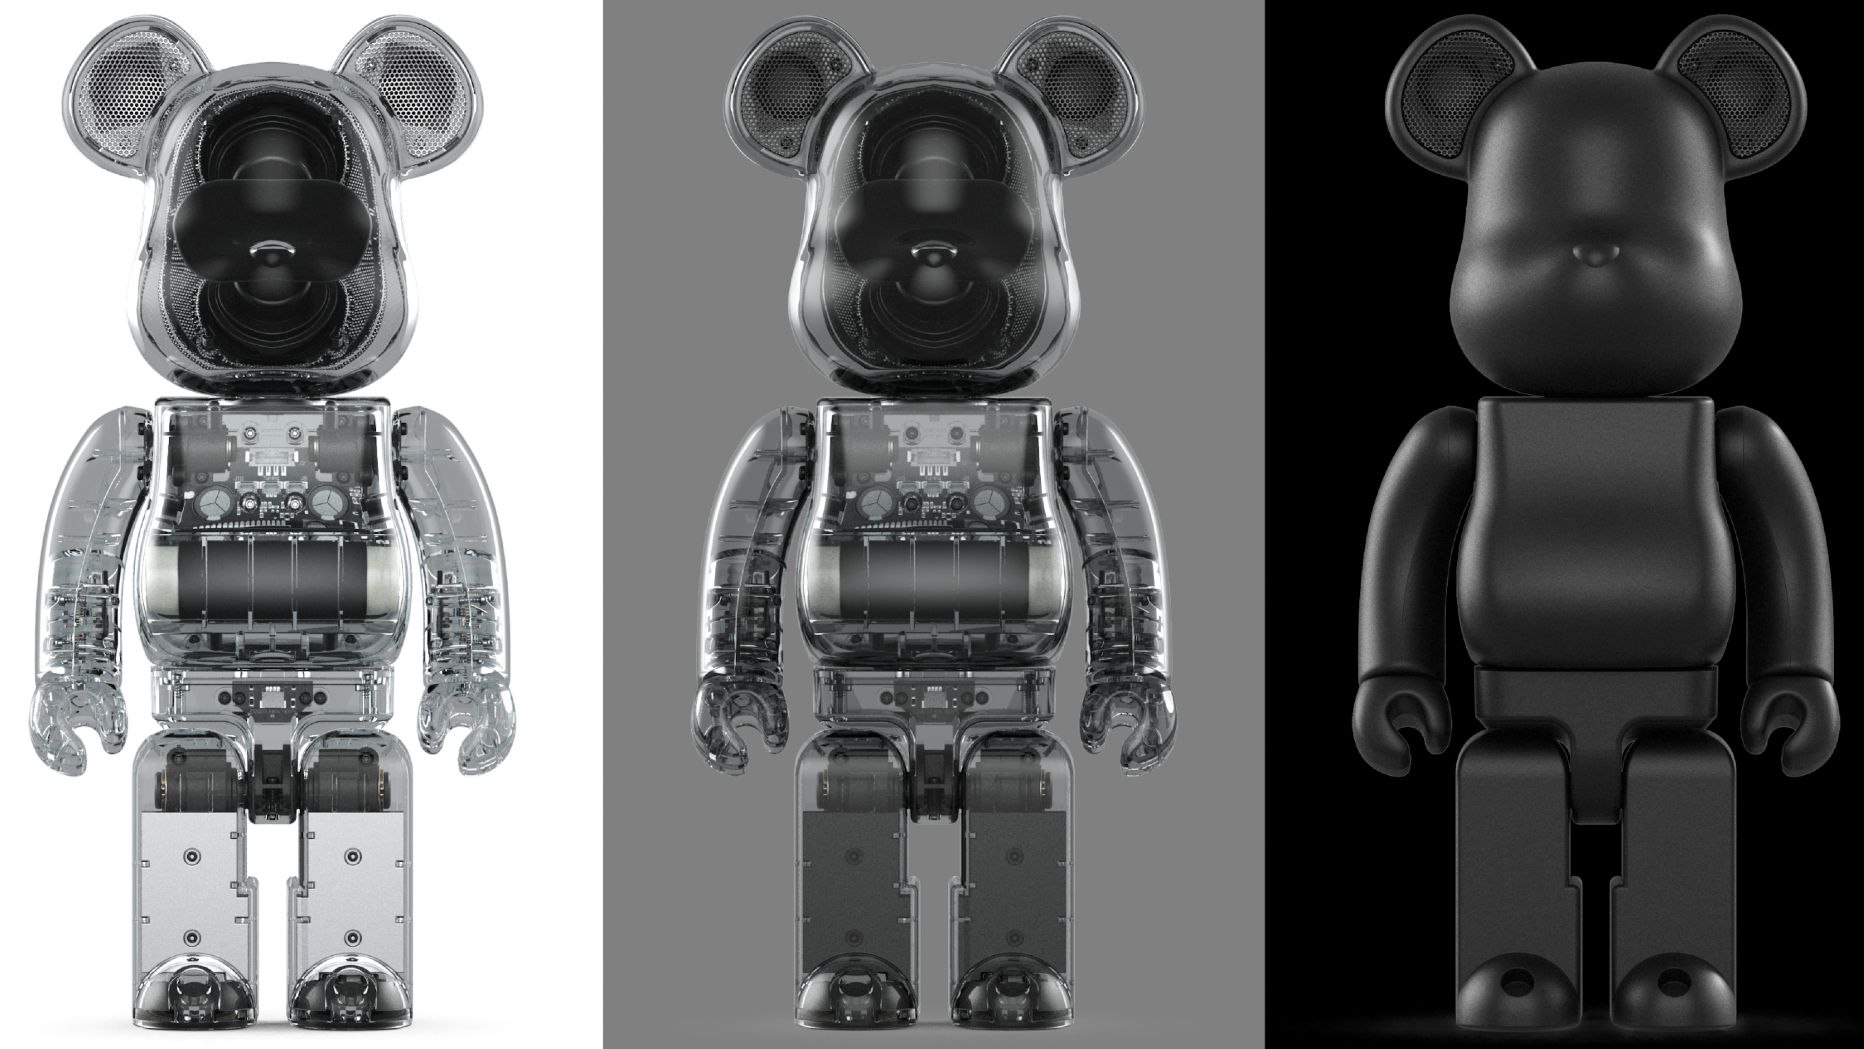 There’s Y2K kitsch, and then there’s this outrageously priced Bearbrick ...